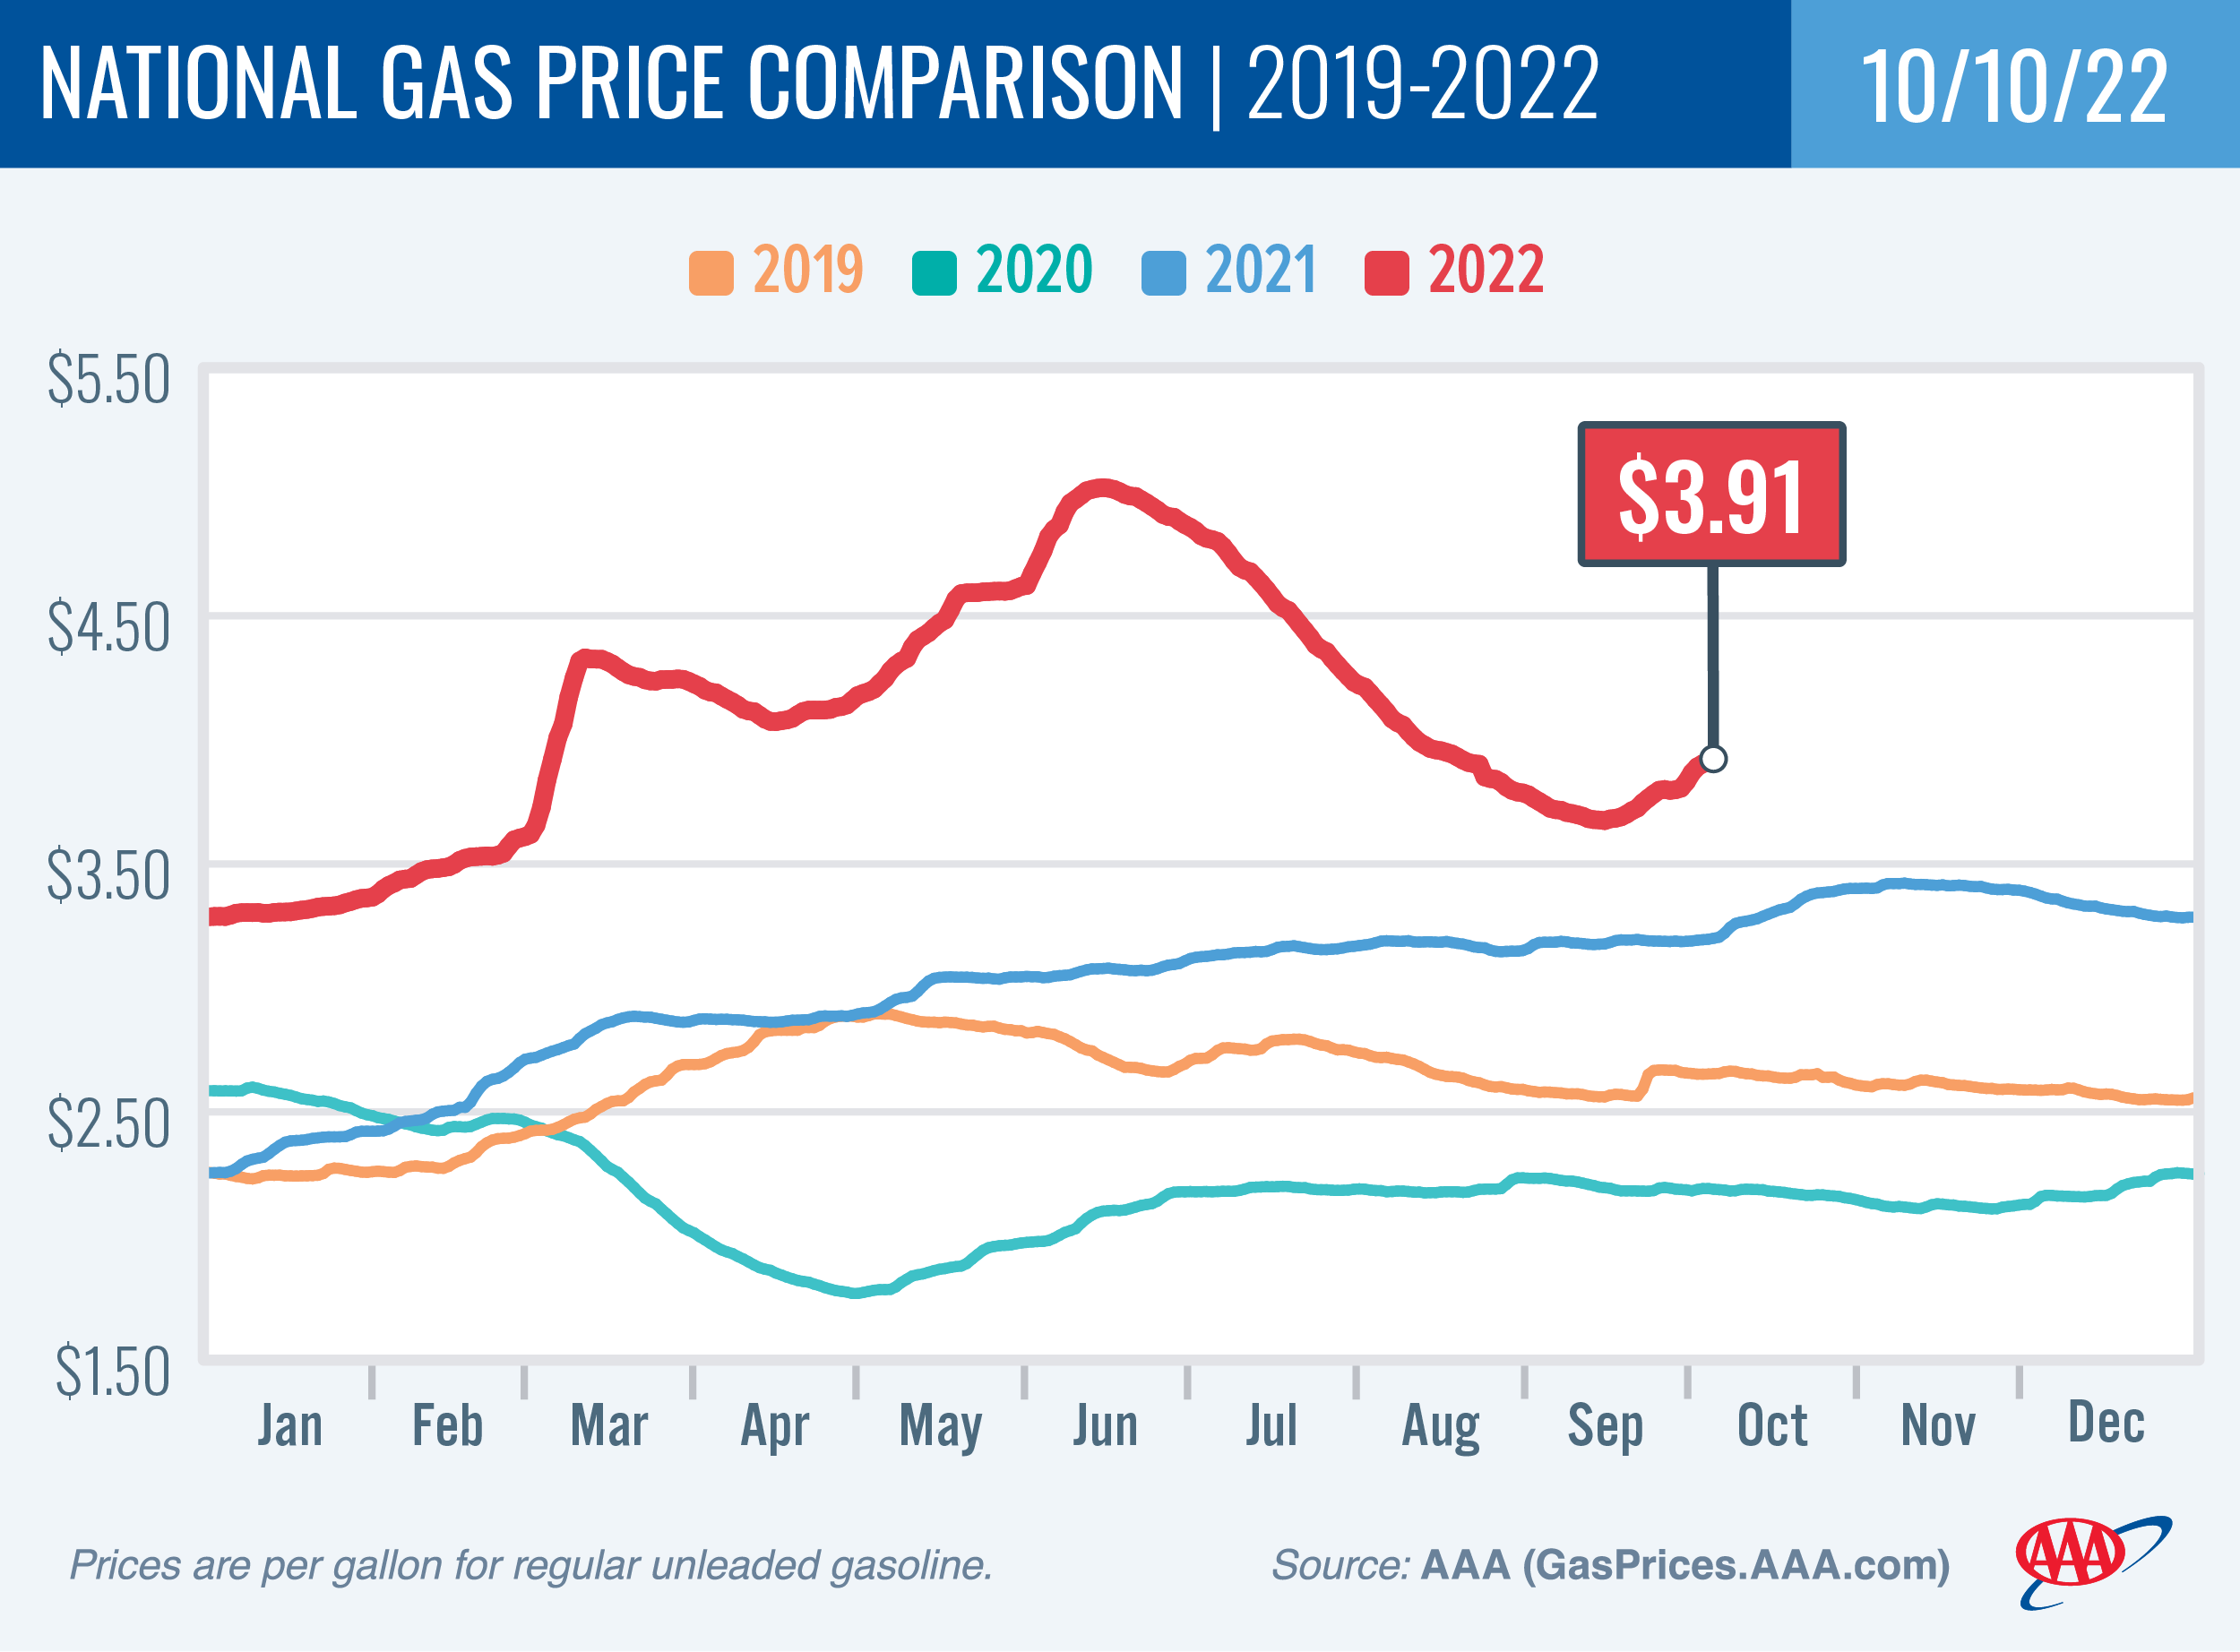 National Gas Price Comparison for October 10, 2022